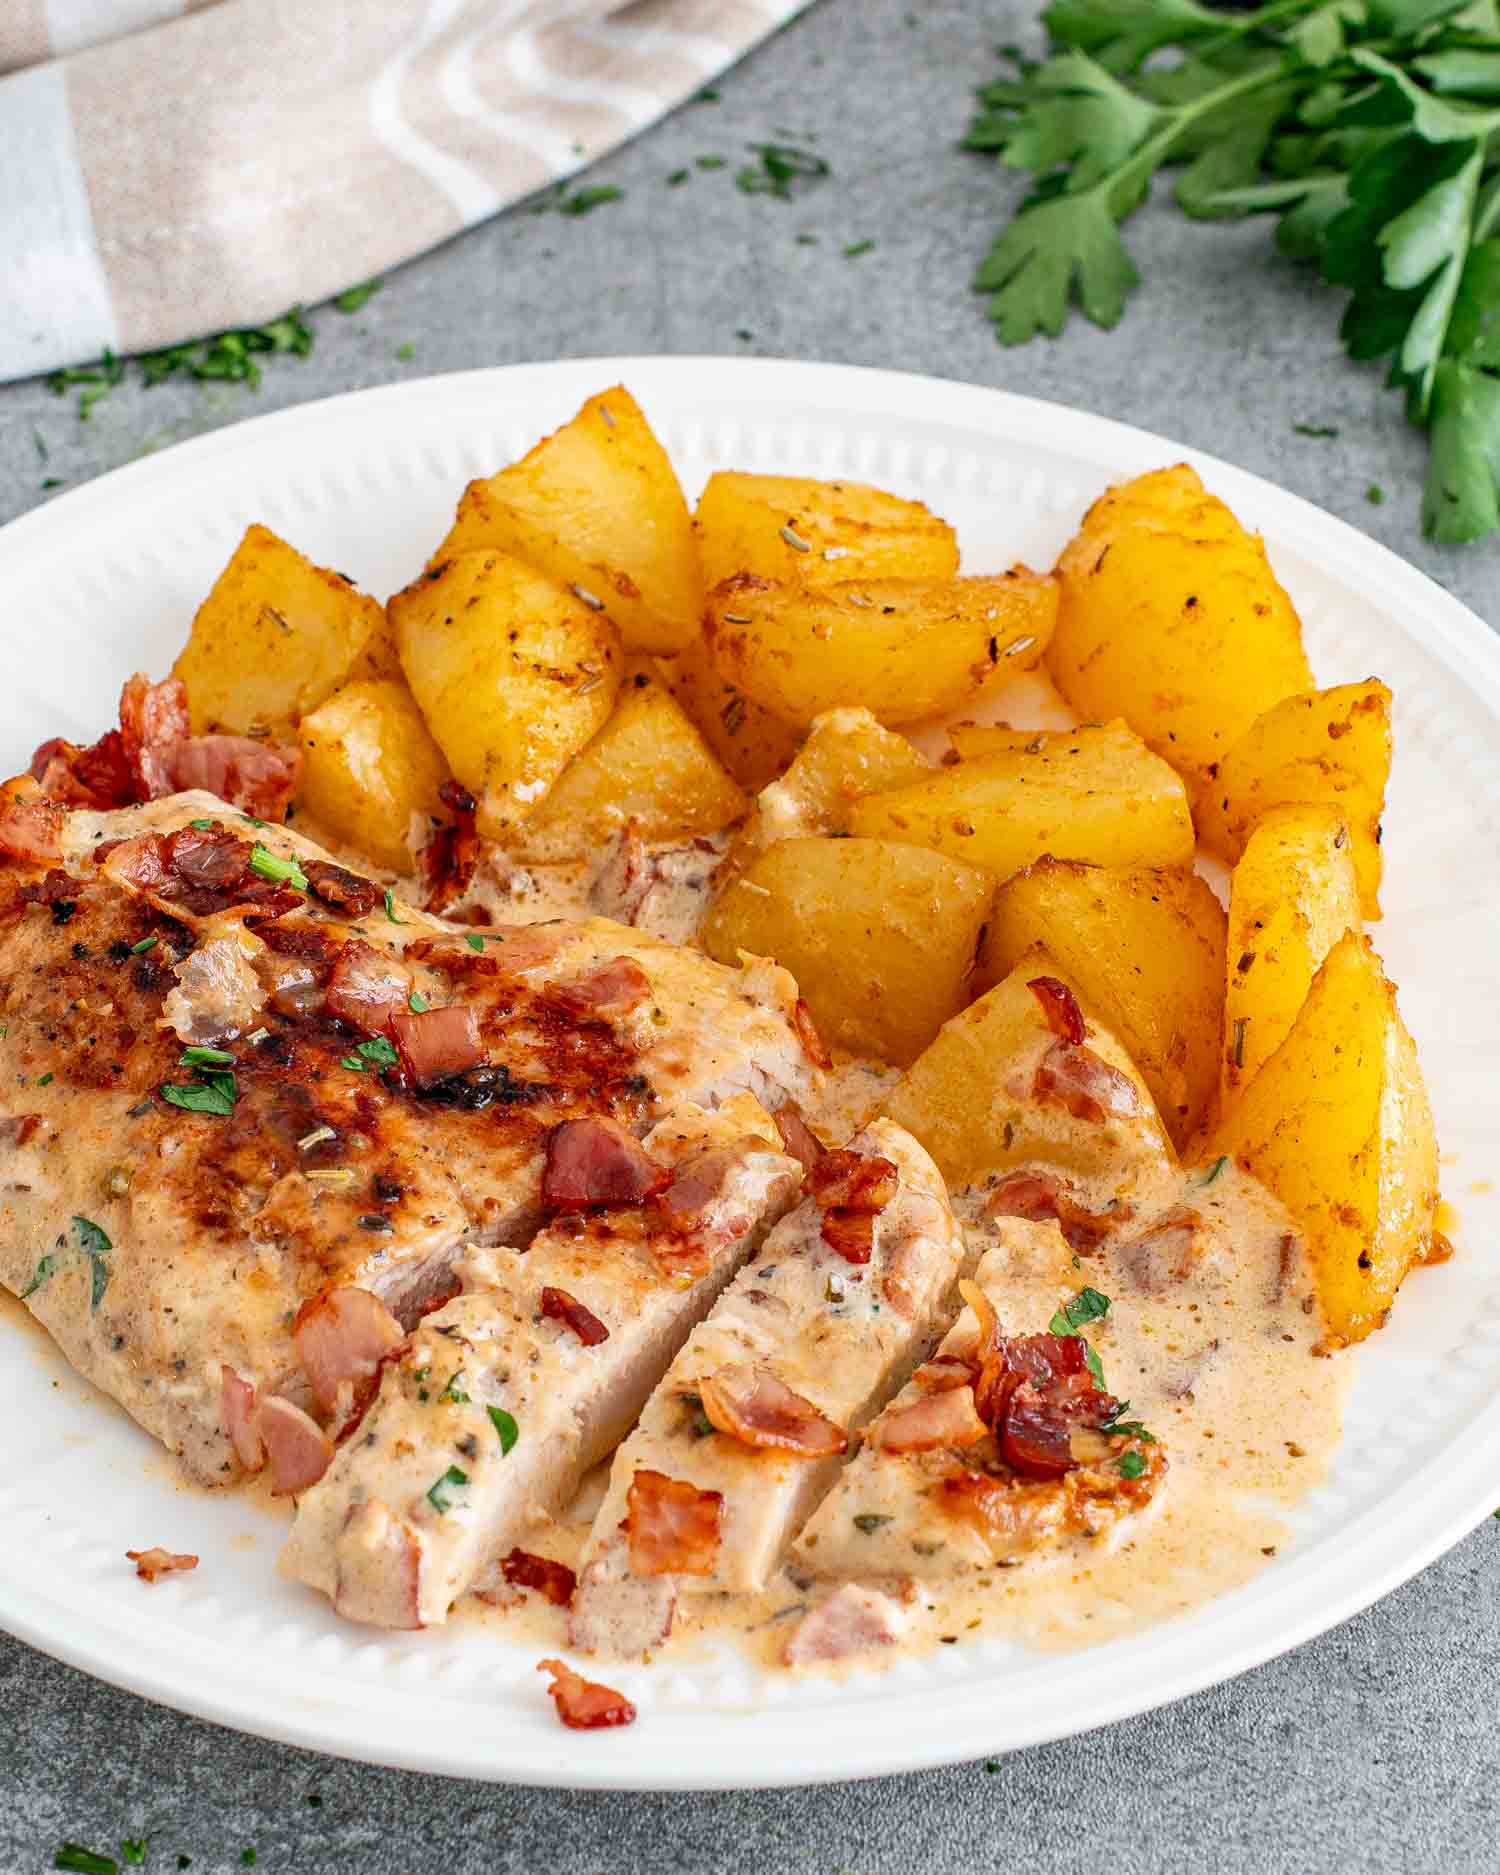 sliced of creamy bacon chicken on a white plate along some roasted potatoes.